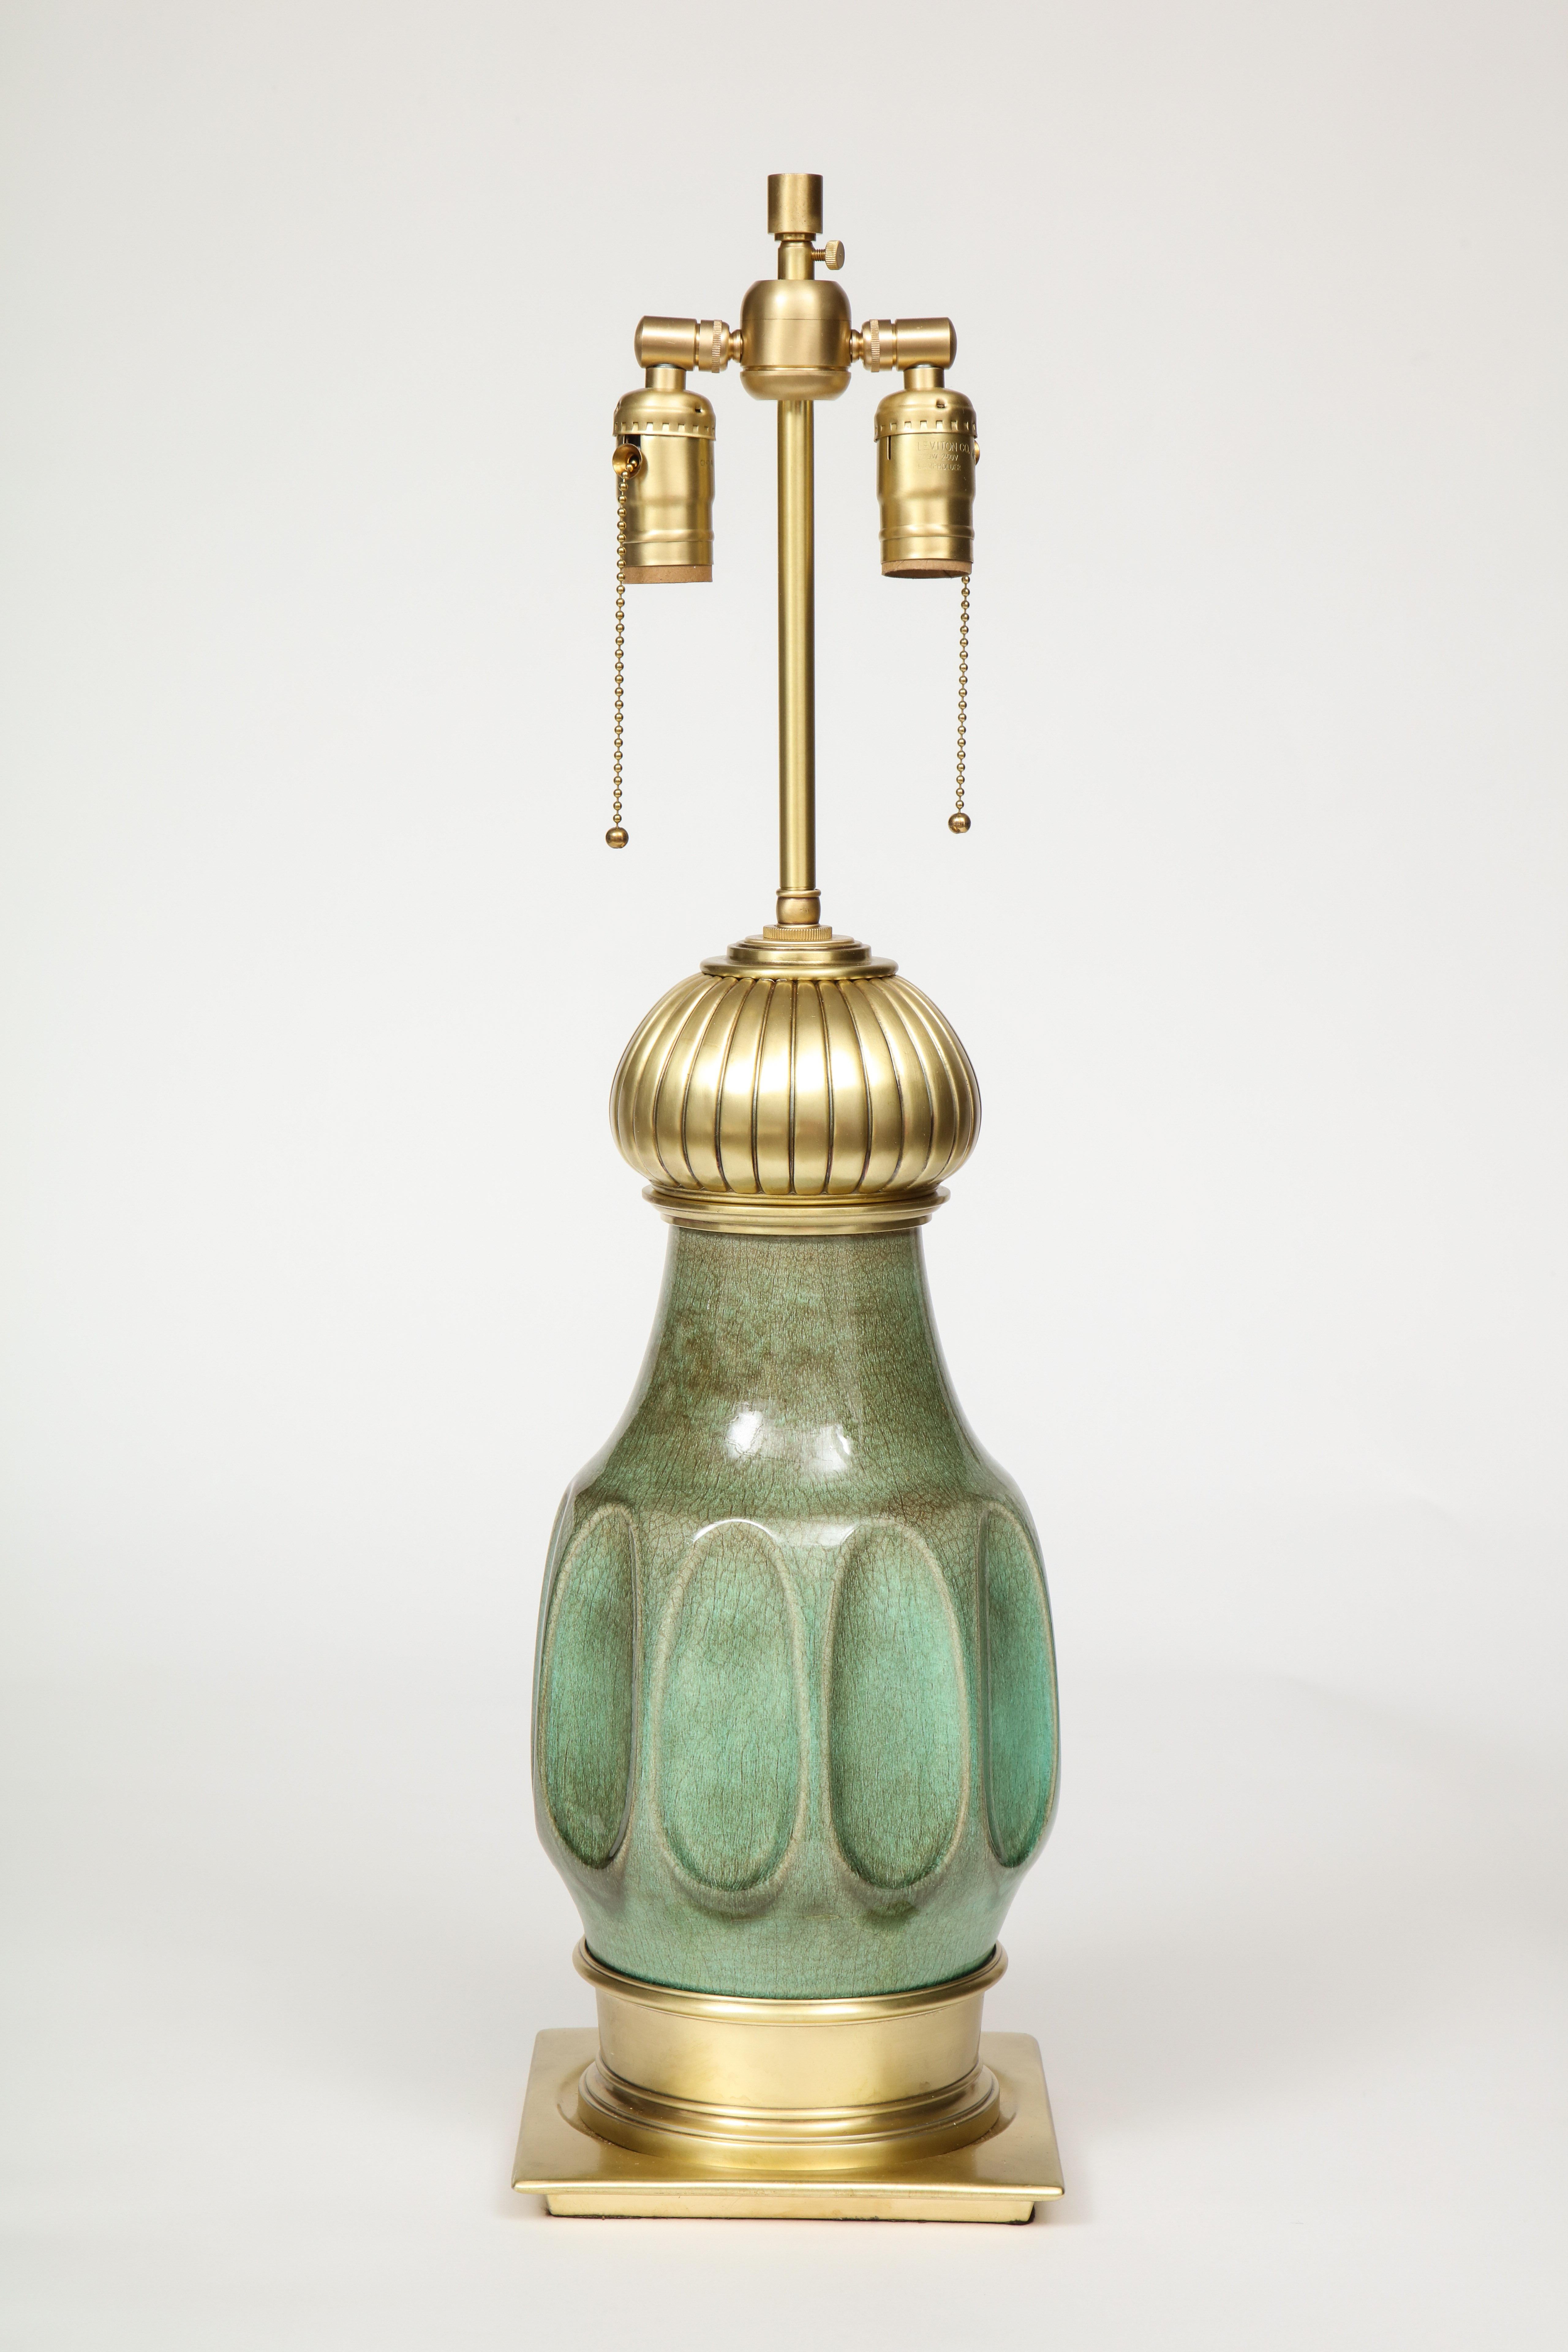 Pair of Midcentury jade green glazed porcelain lamps with satin brass hardware. Lamps have been rewired for use in the USA, double cluster sockets can be height adjusted, each socket can accommodate up to 75W bulbs.